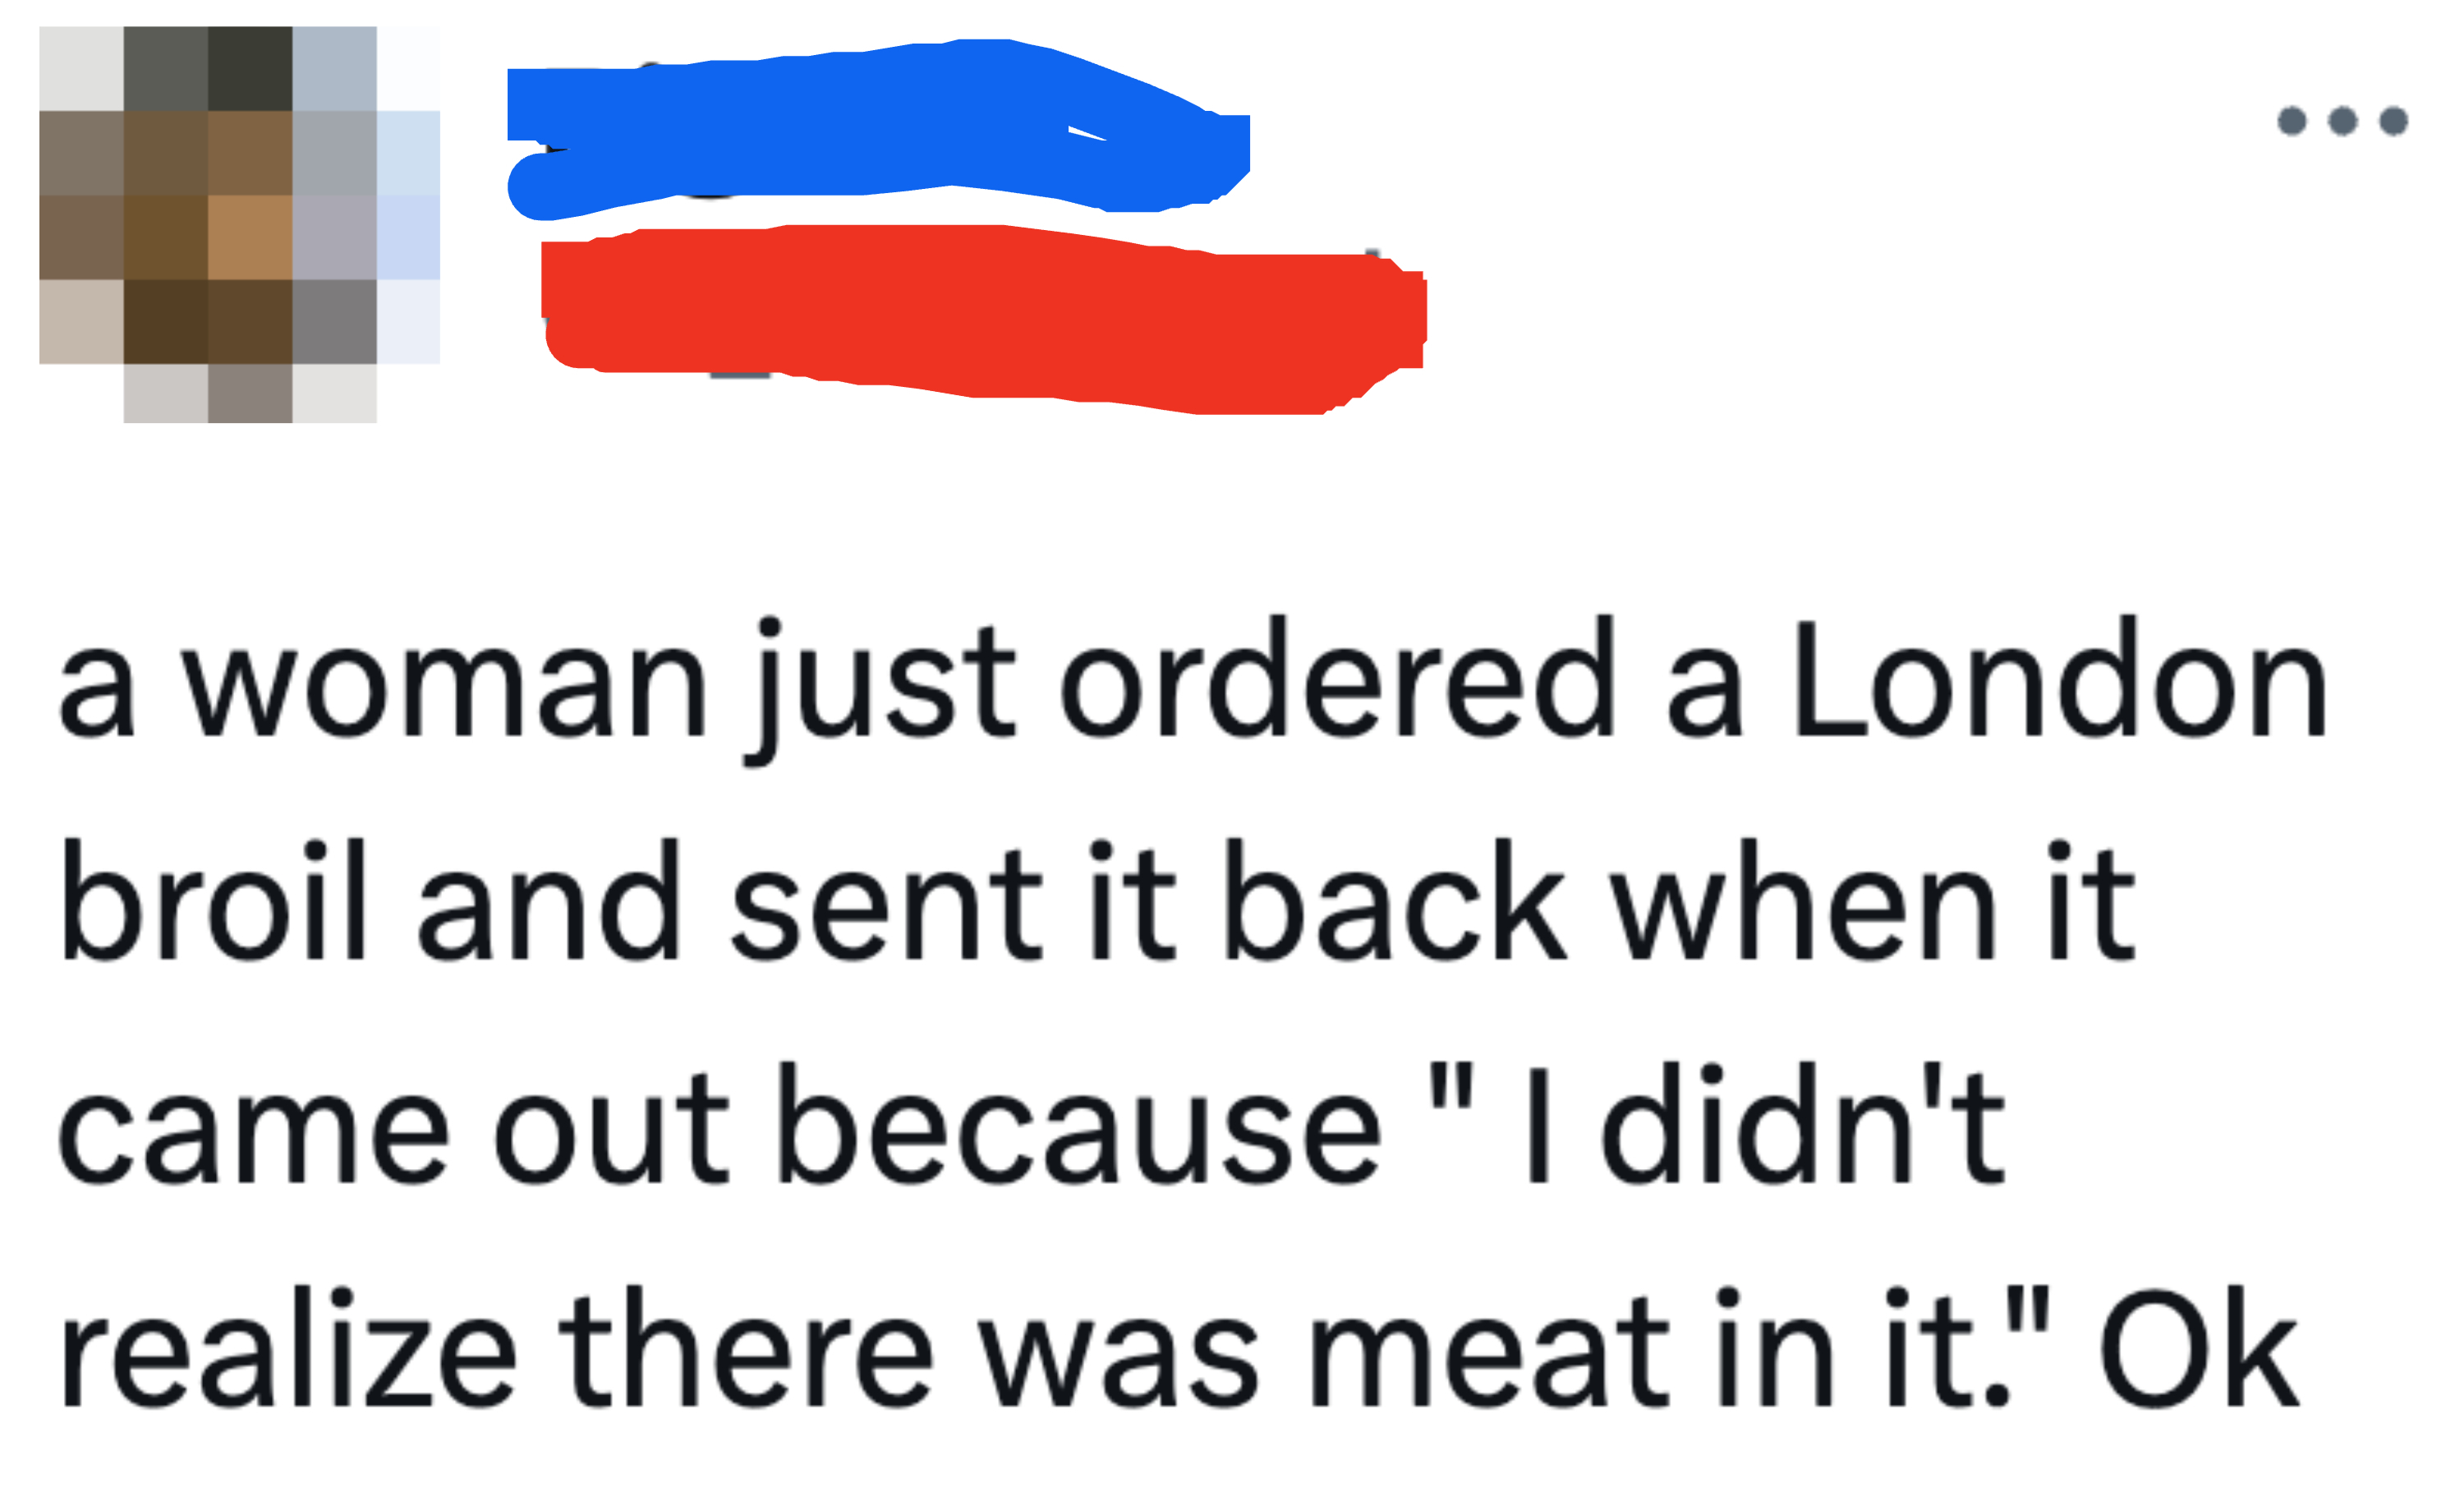 &quot;I didn&#x27;t realize there was meat in it.&quot;